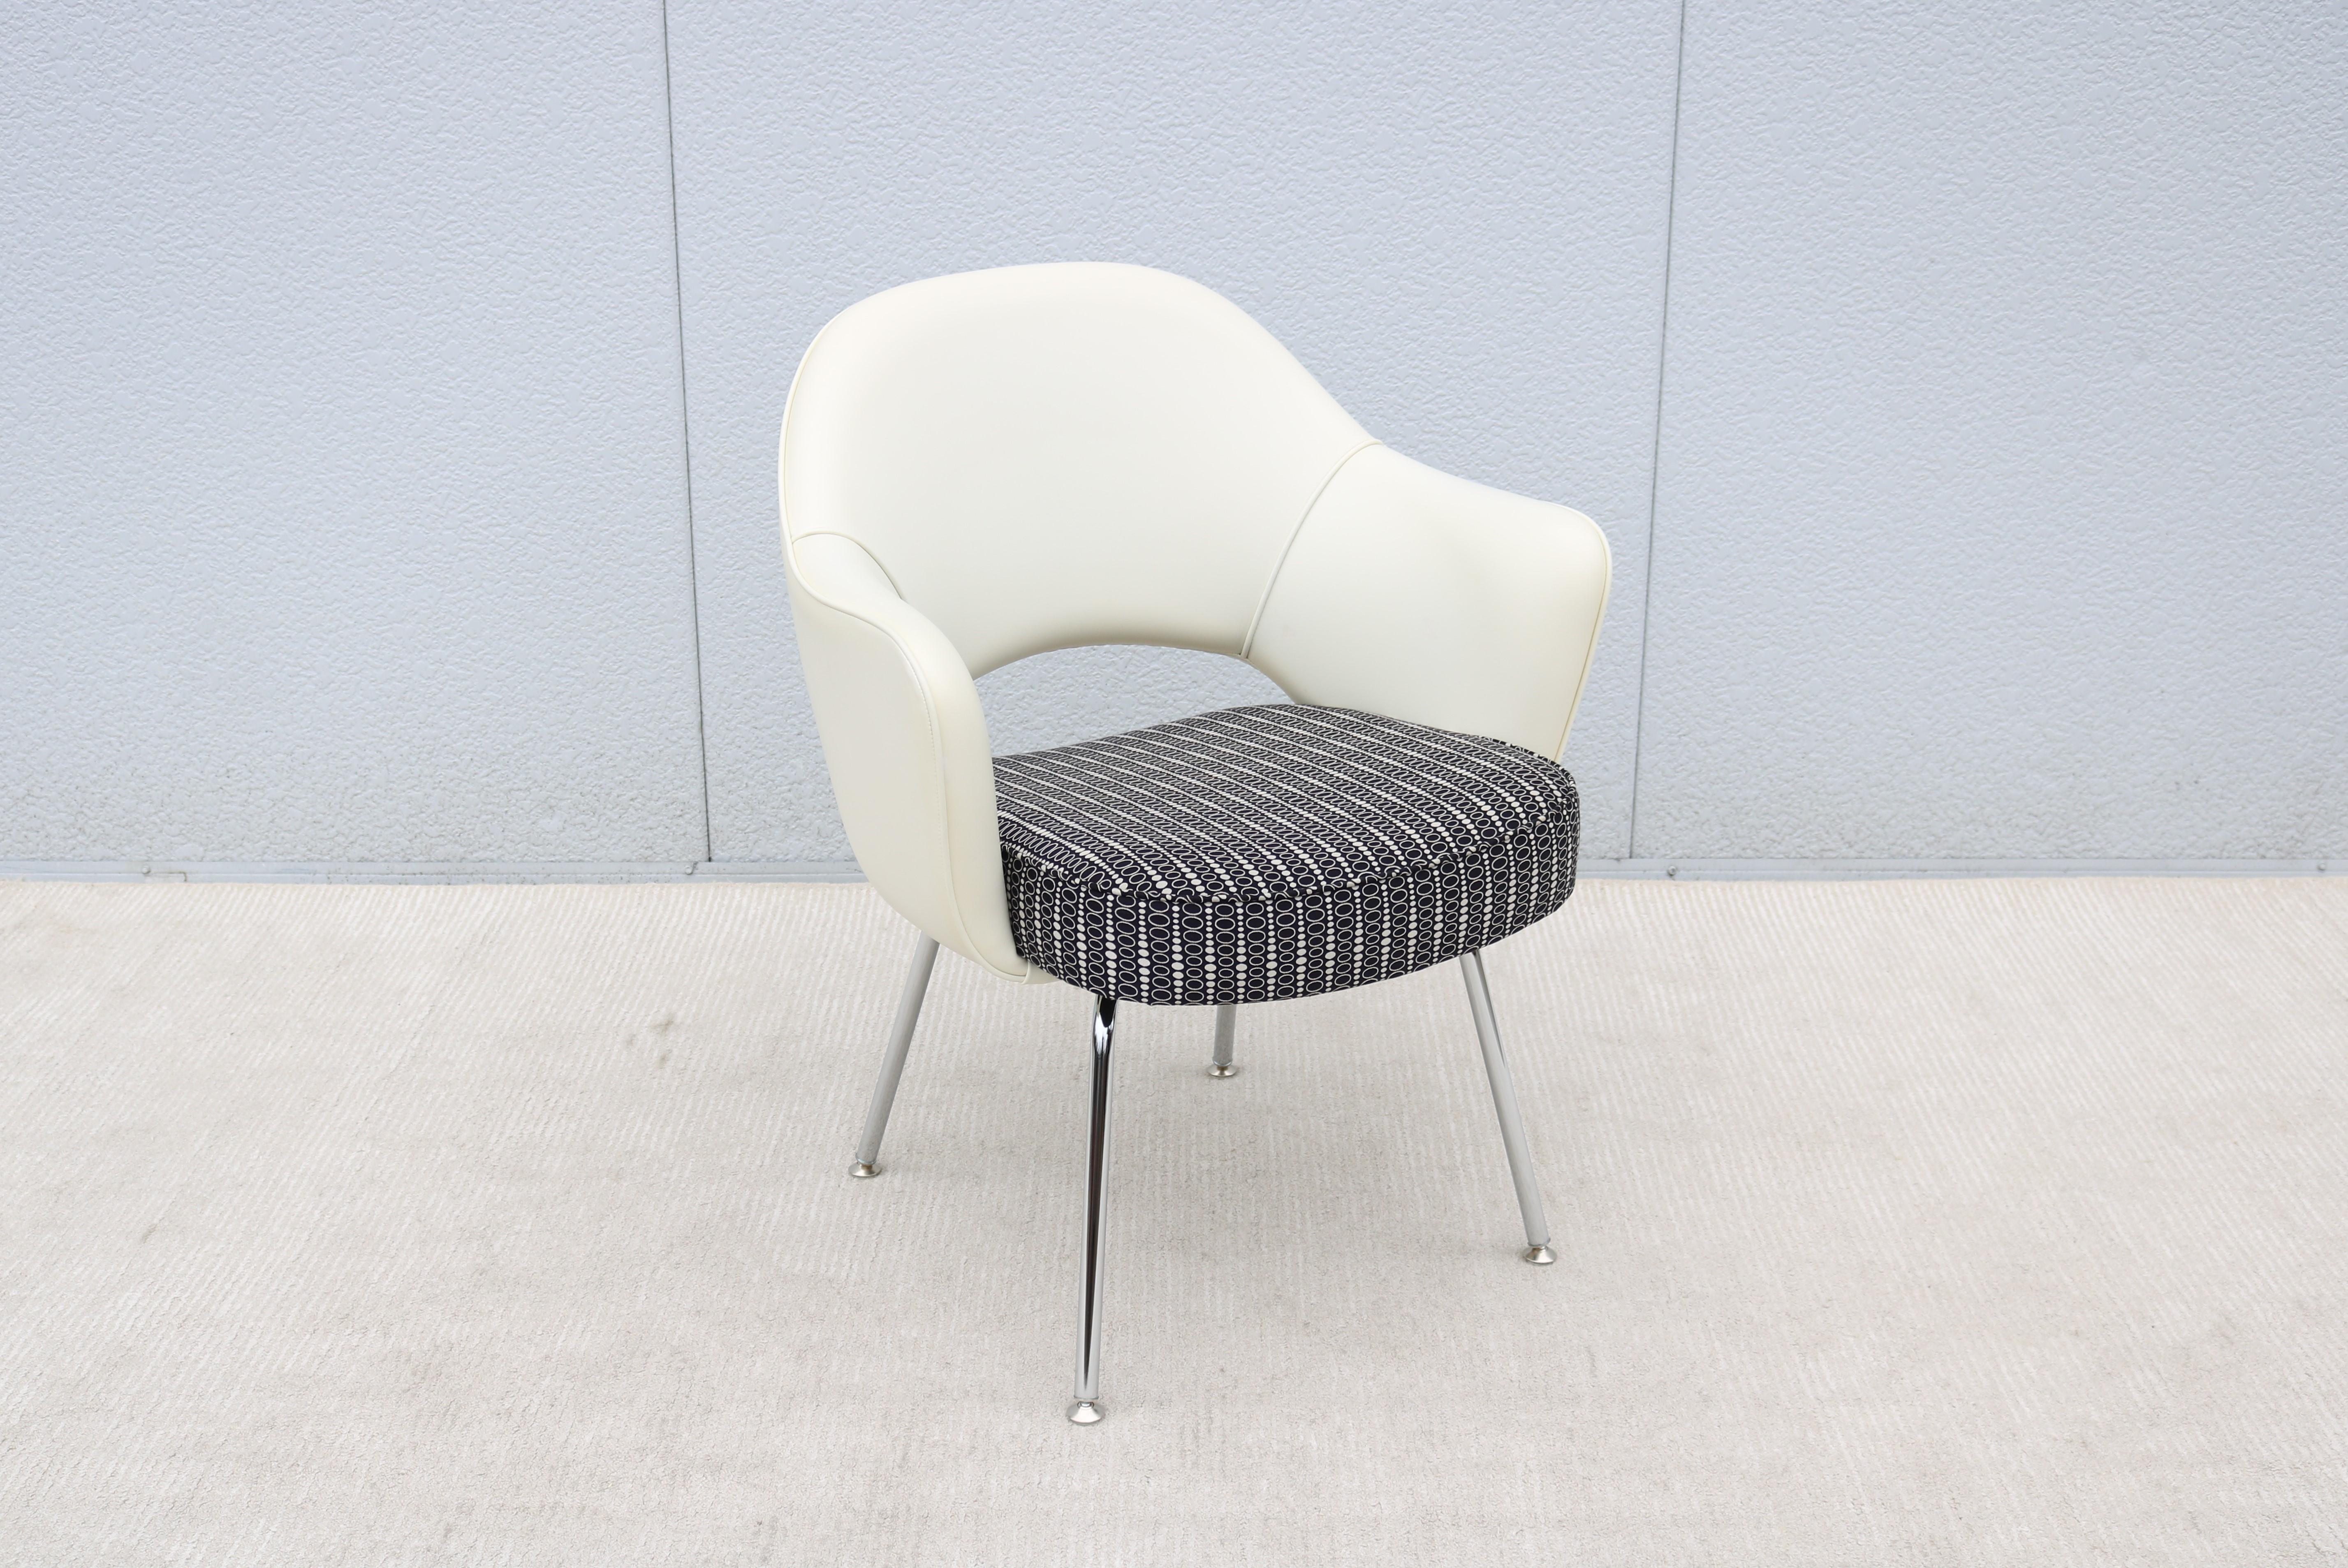 Polished Mid-Century Modern Eero Saarinen for Knoll White and Black Executive Arm Chair For Sale